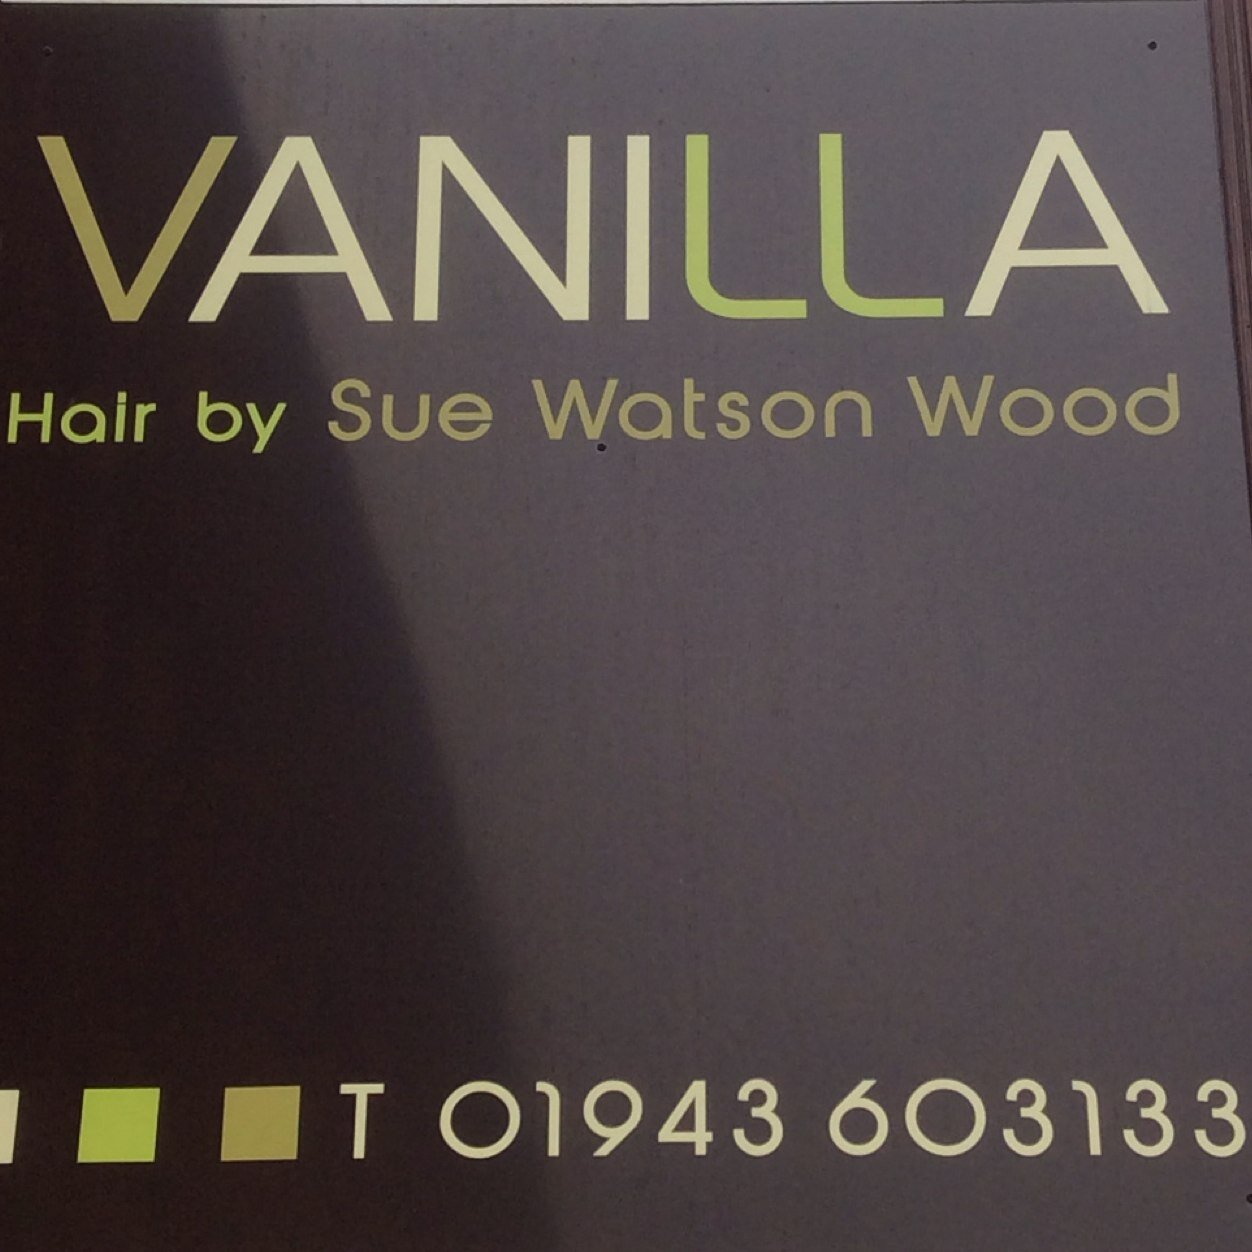 Professional, affordable, luxury. Our team @Vanilla_ilkley Hair Salon are experienced and ready to help and advise you. 01943603133